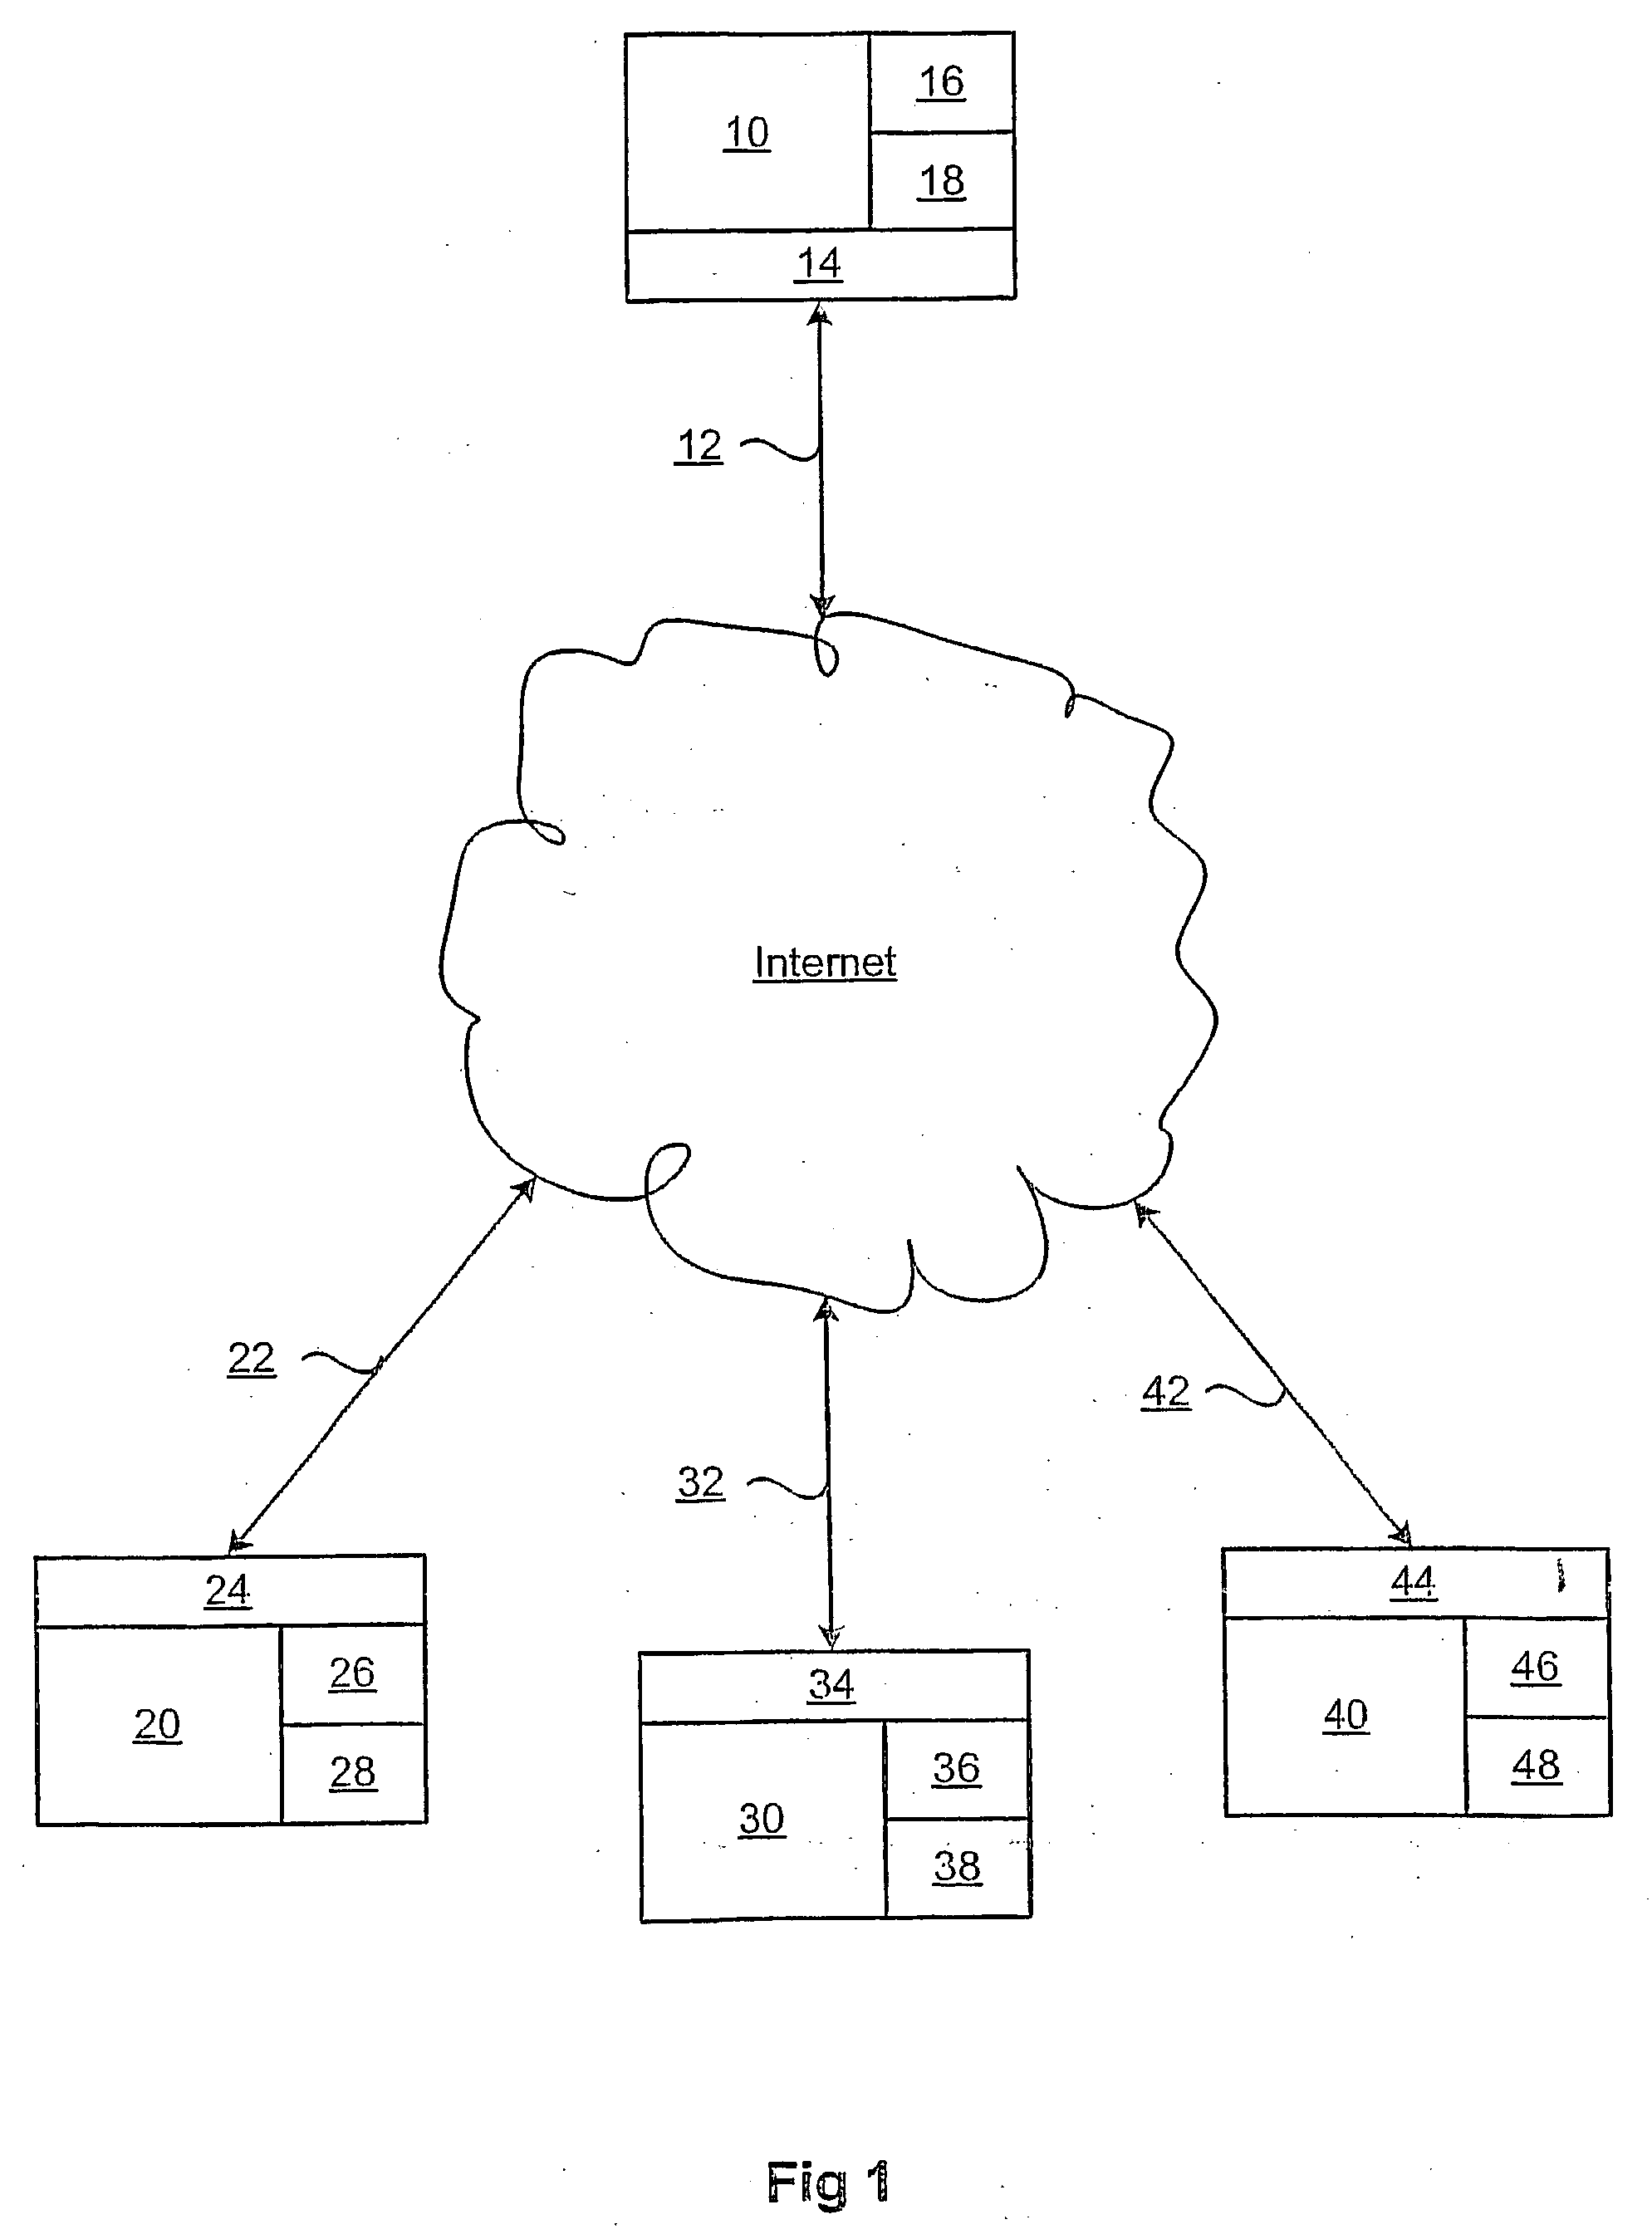 Apparatus and method for conveying private information within a group communication system